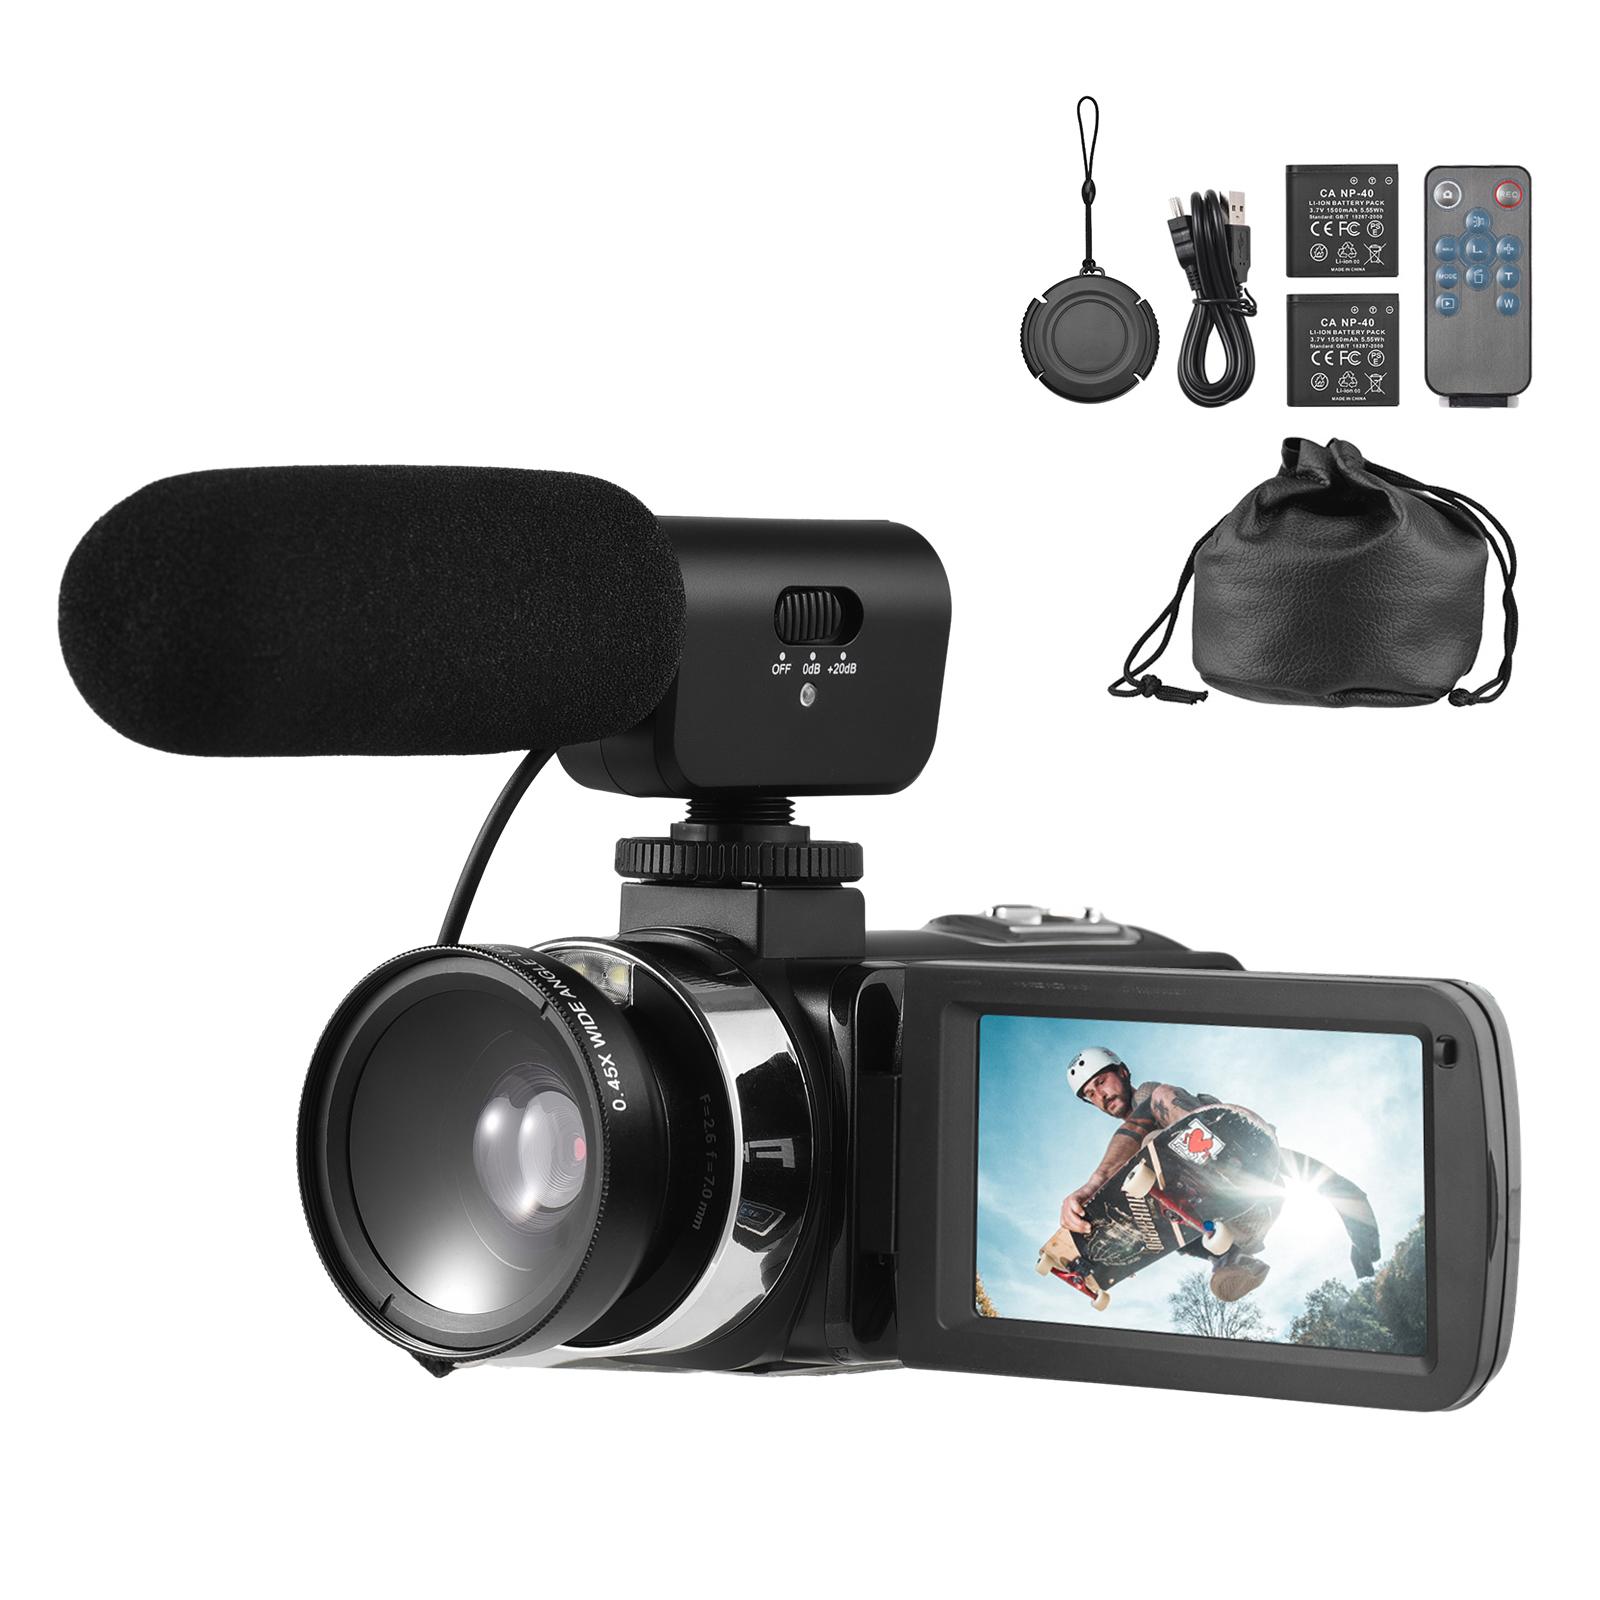 TOMTOP JMS FHD 1080P Digital Video Camera Camcorder DV Recorder 30MP 18X Digital Zoom 3.0 Inch Screen Supports